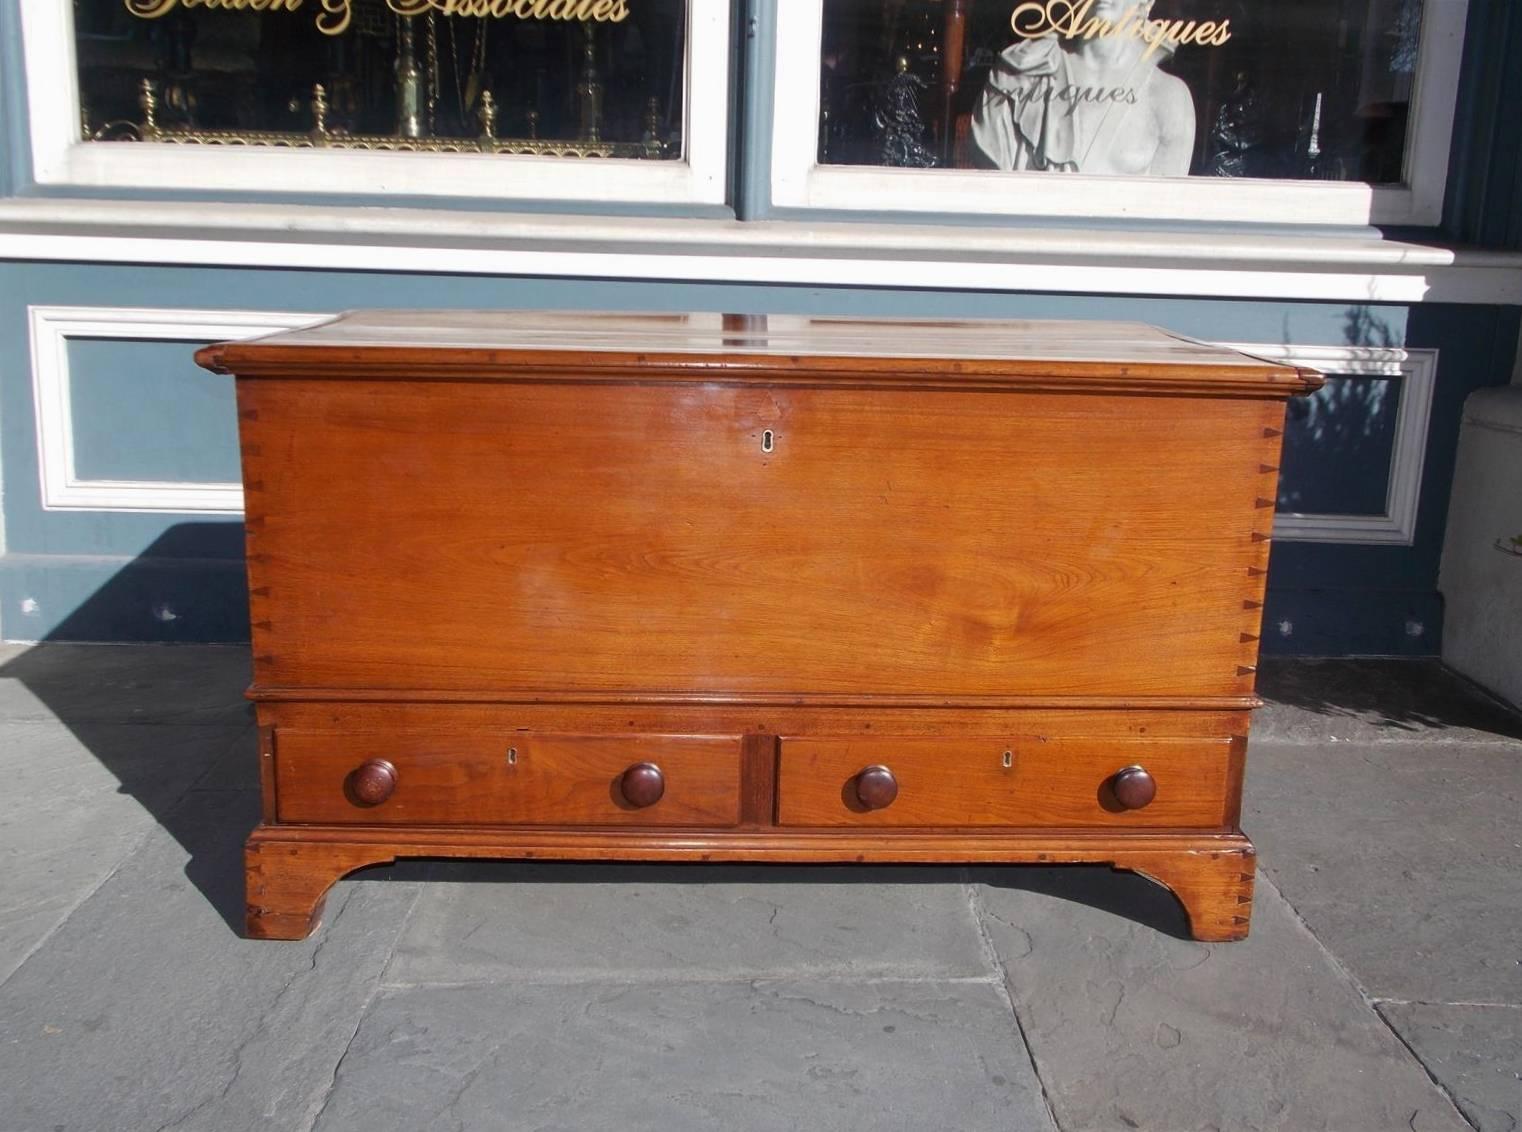 American Chippendale two-drawer walnut blanket chest with a carved molded edge, hinged top, interior till, exposed dovetail, and resting on the original bracket feet. Late 18th Century. Secondary wood consist of poplar throughout.